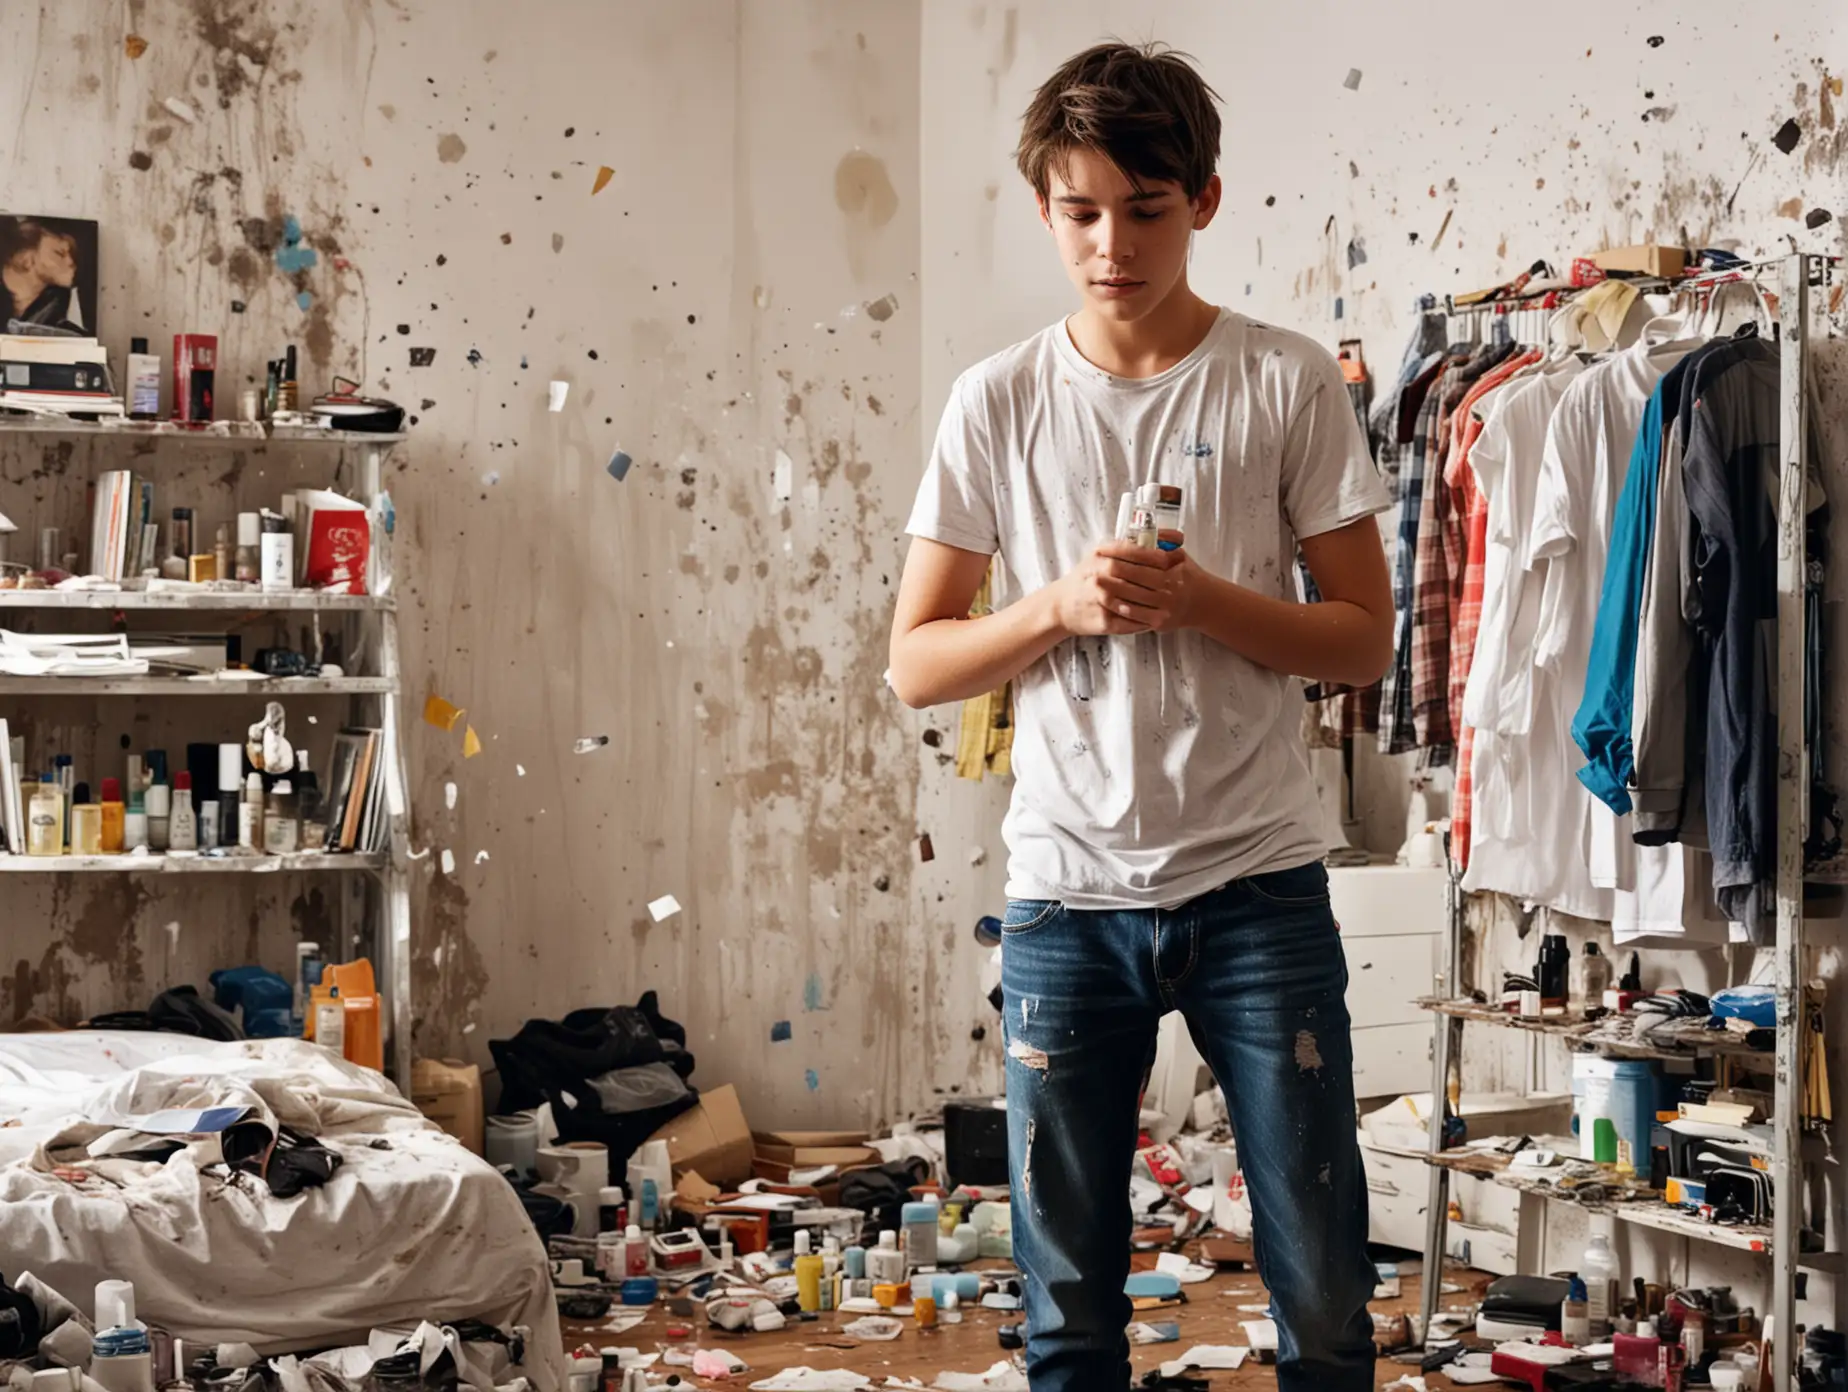 Teenage Boy Spraying Cheap Cologne in Messy Bedroom